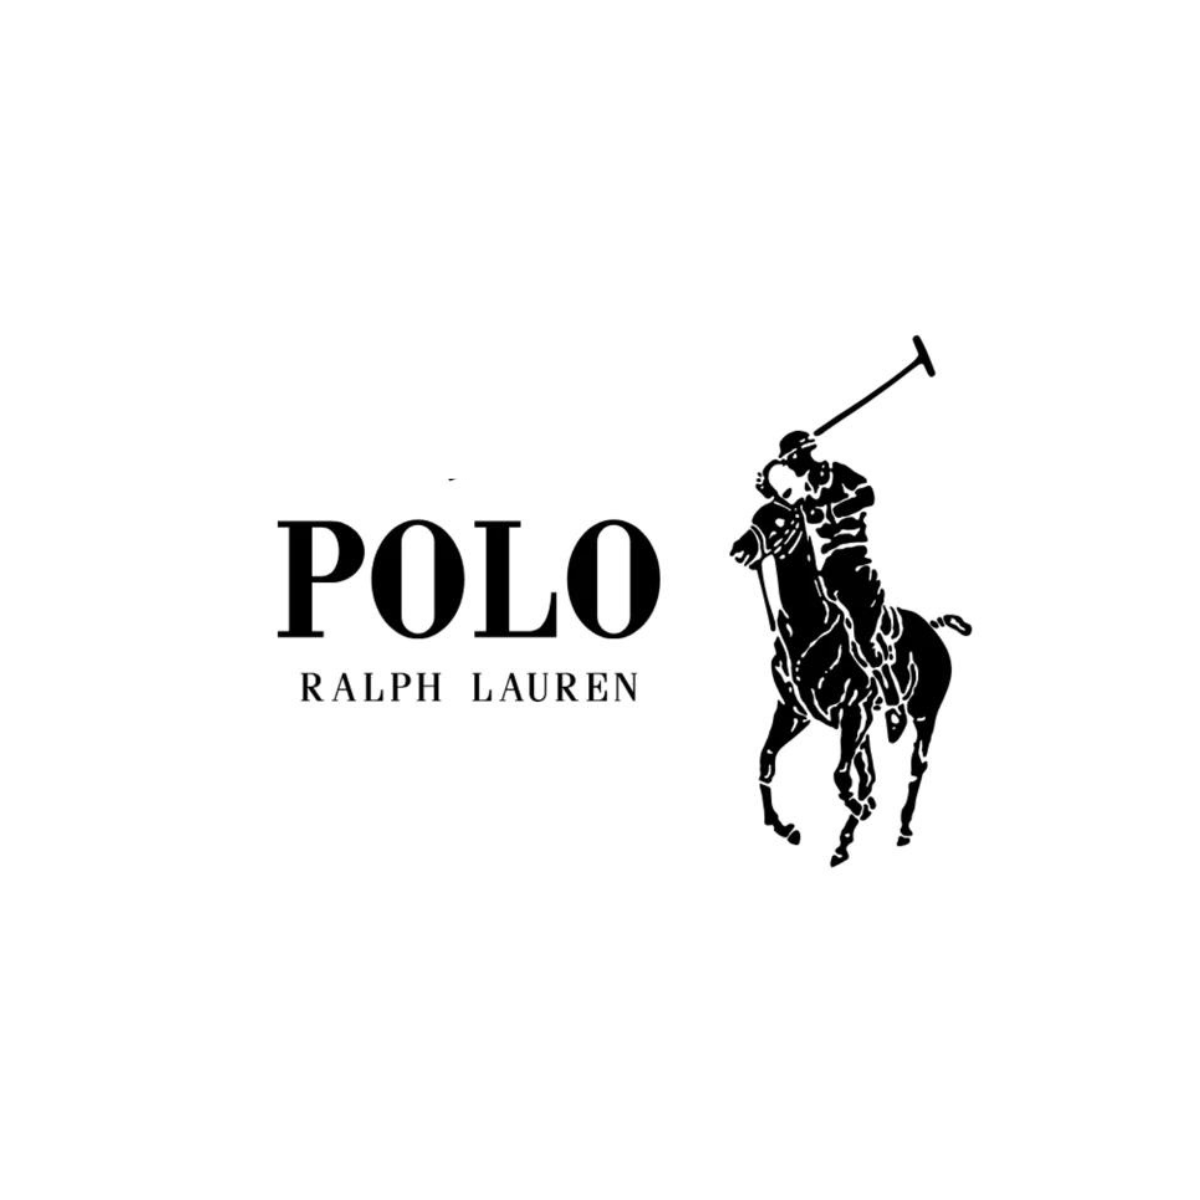 "Explore the newest Polo Ralph Lauren eyewear collection at Optorium with free shipping on all orders. Browse sunglasses, frames, optical lenses, and more online. Shop now!"